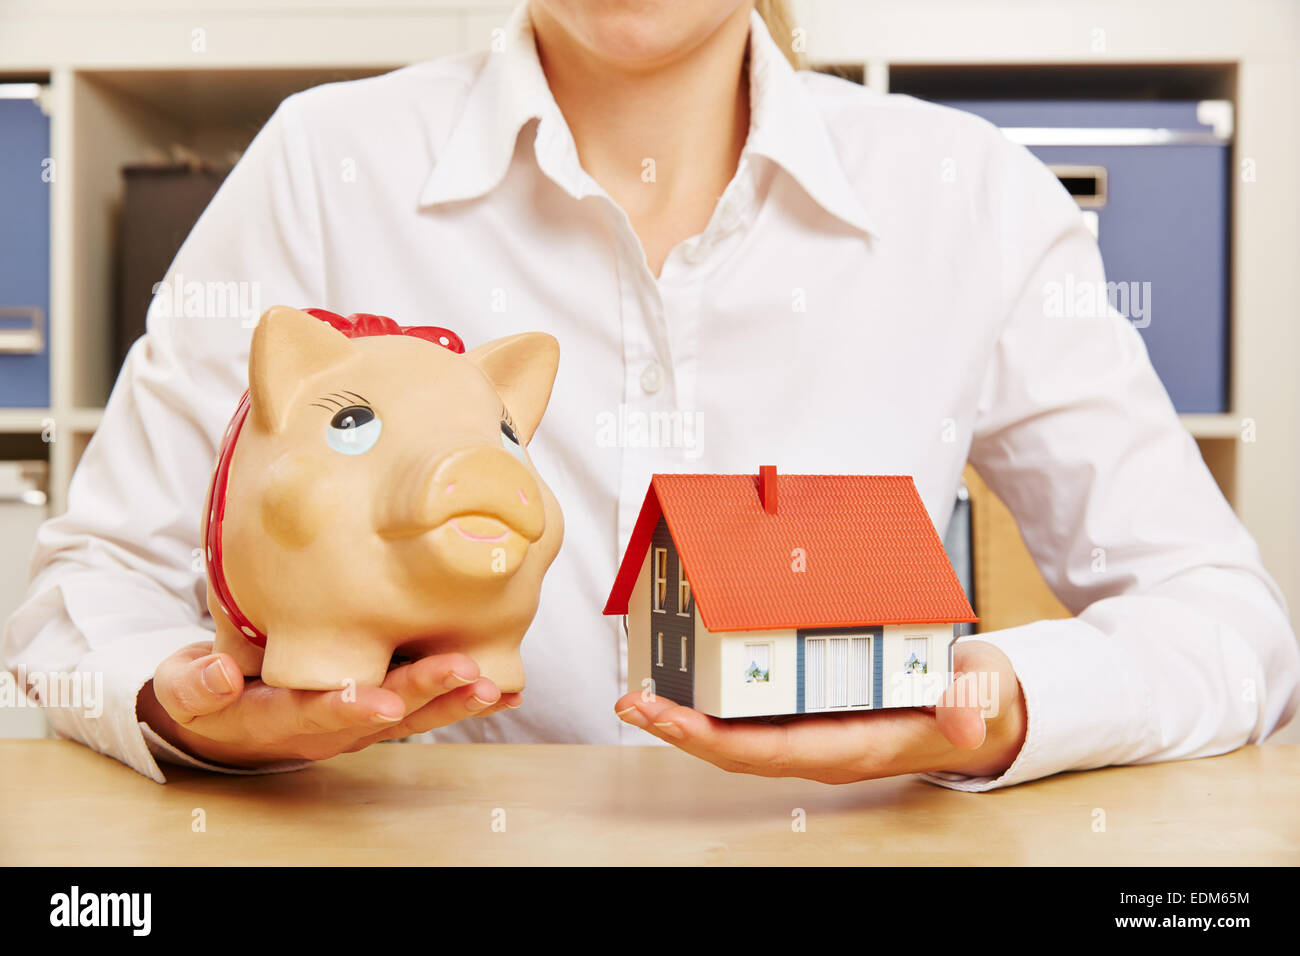 Building society savings concept with hands holding house and a piggy bank Stock Photo